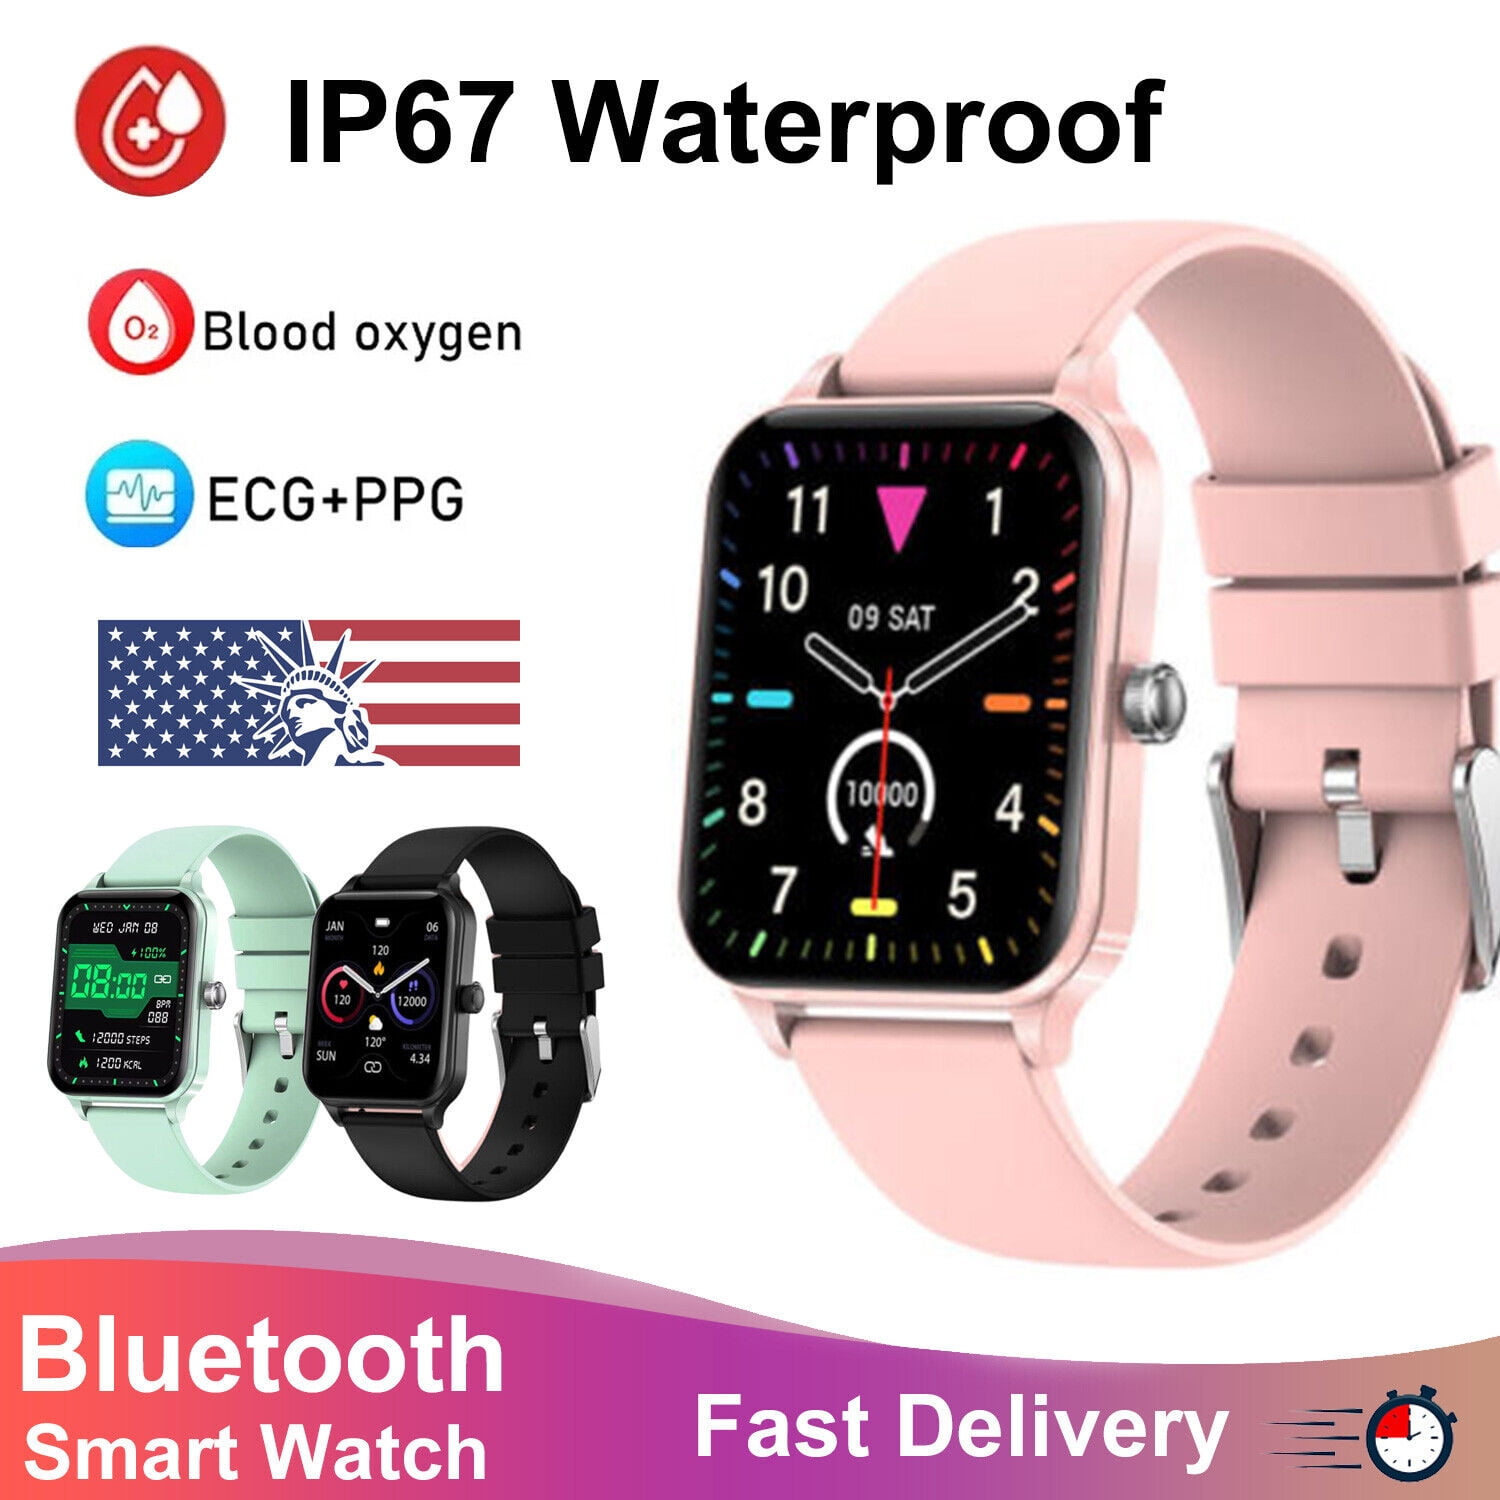 POLAR Vantage V2 - Premium Multisport Smartwatch with GPS, Wrist-Based HR  Measurement for All Sports - Music Control, Weather, Phone Notifications  comes with Polar H10 Heart Rate Sensor 